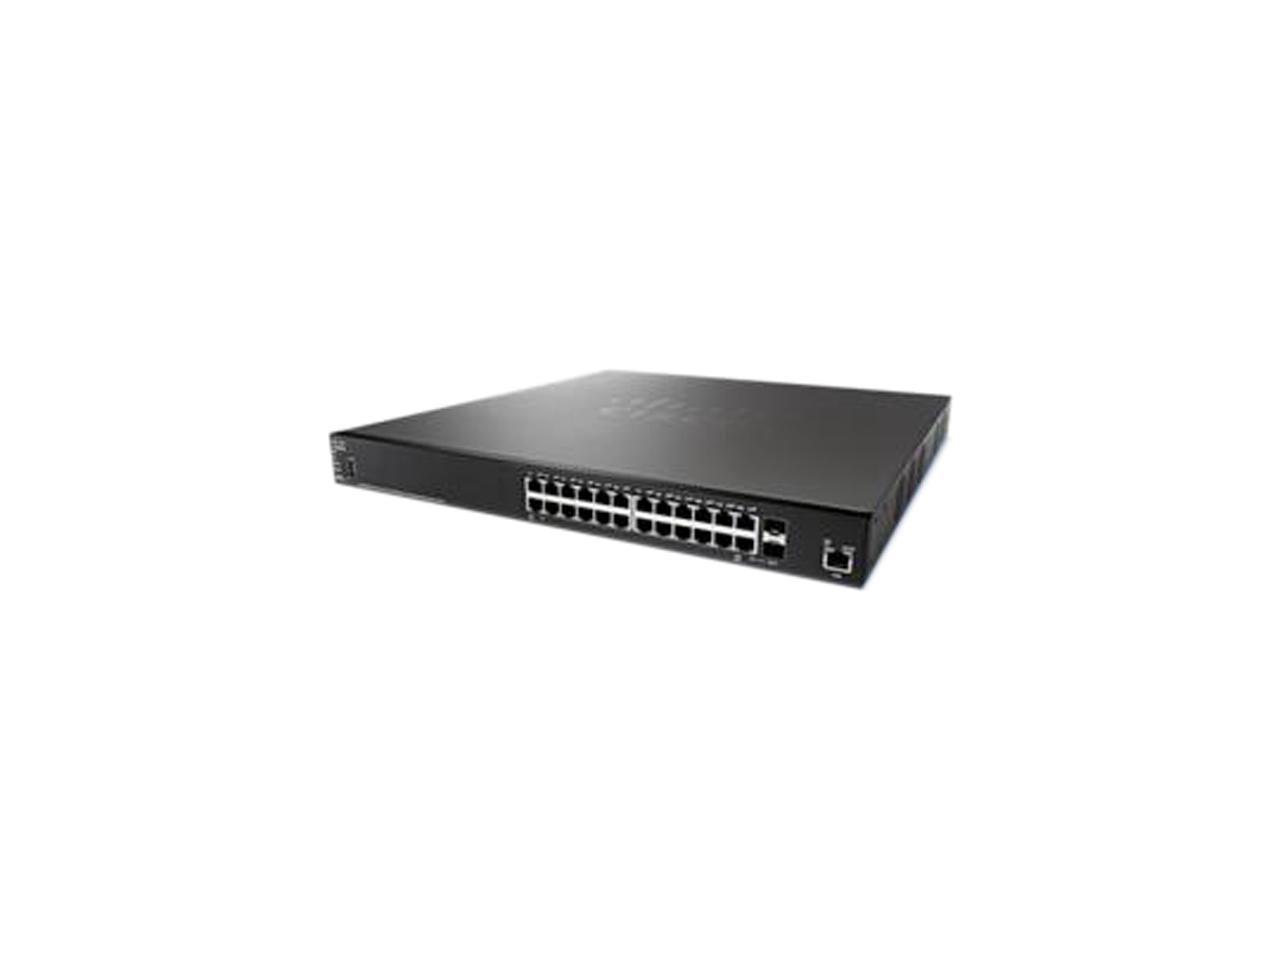 Cisco 24-Port 10GBase-T Stackable Managed Switch Model SG350XG-24T-K9-NA